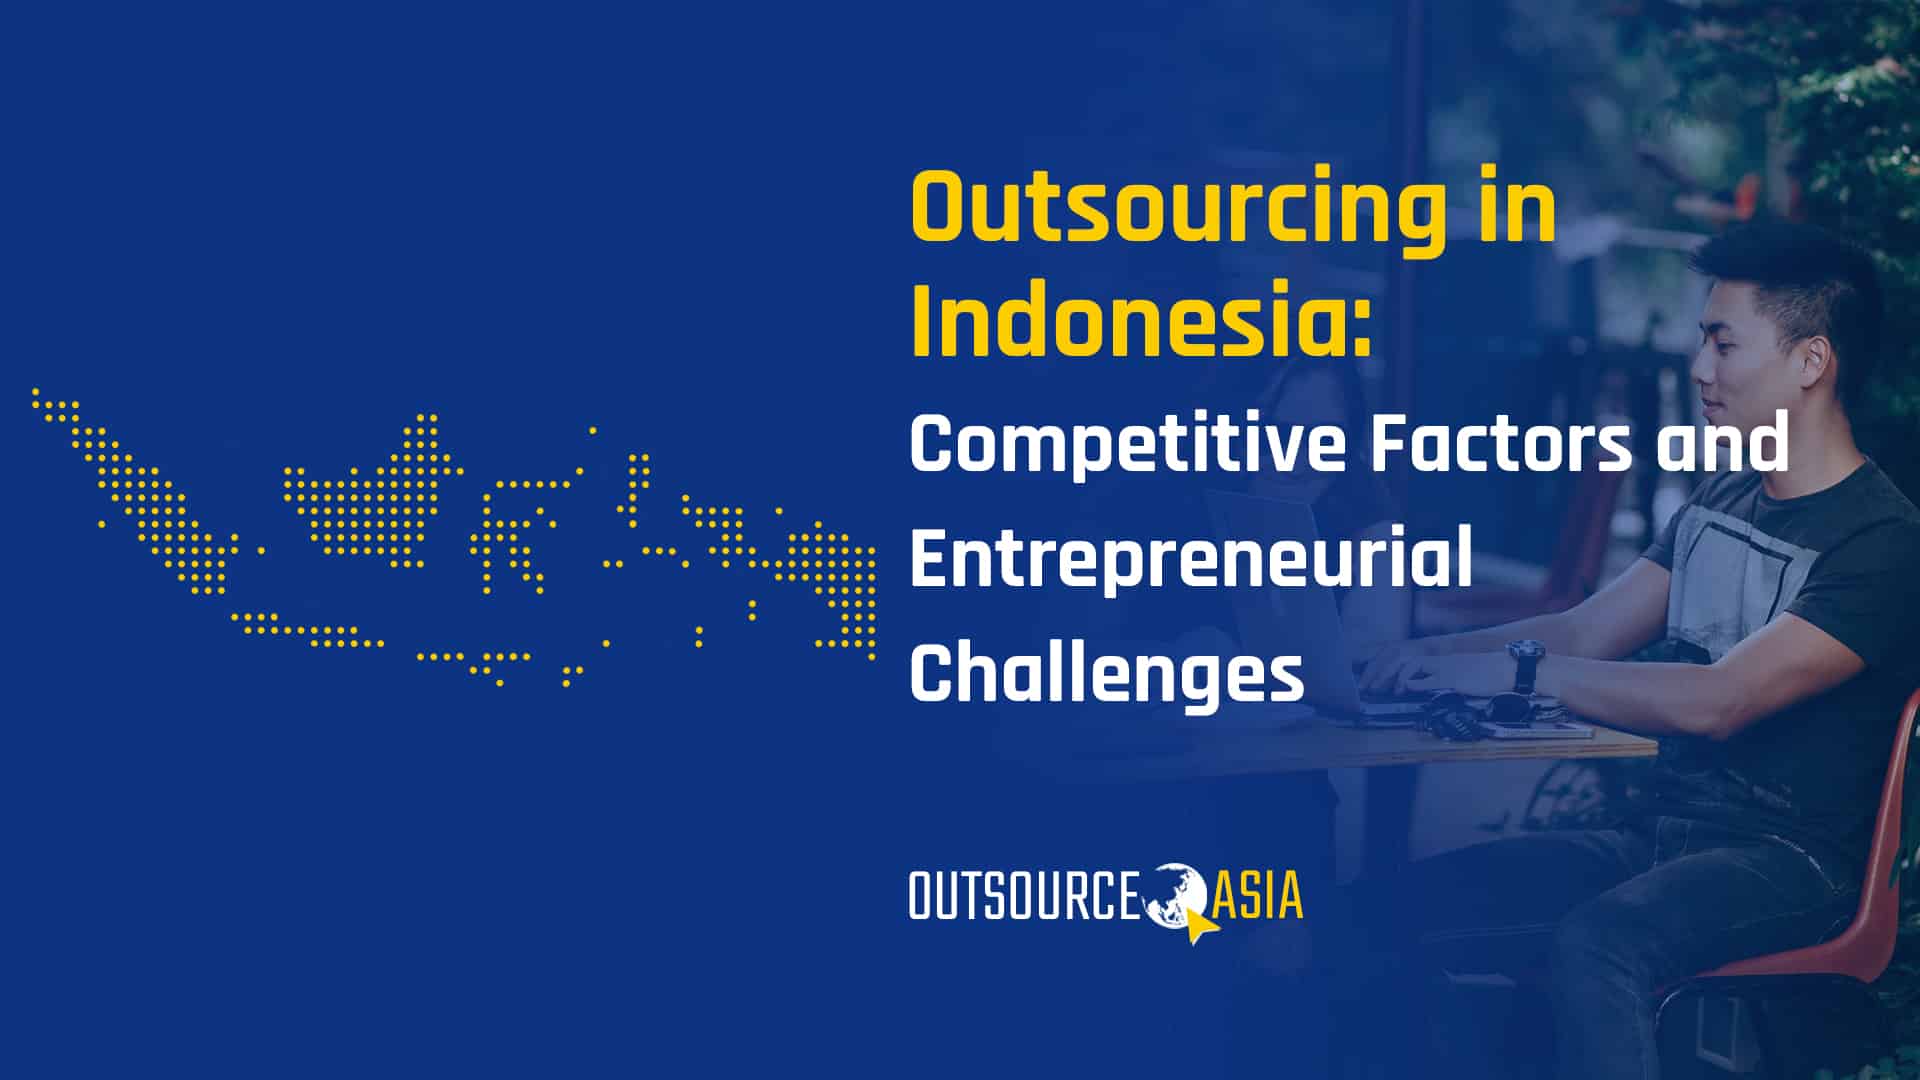 Outsourcing in Indonesia